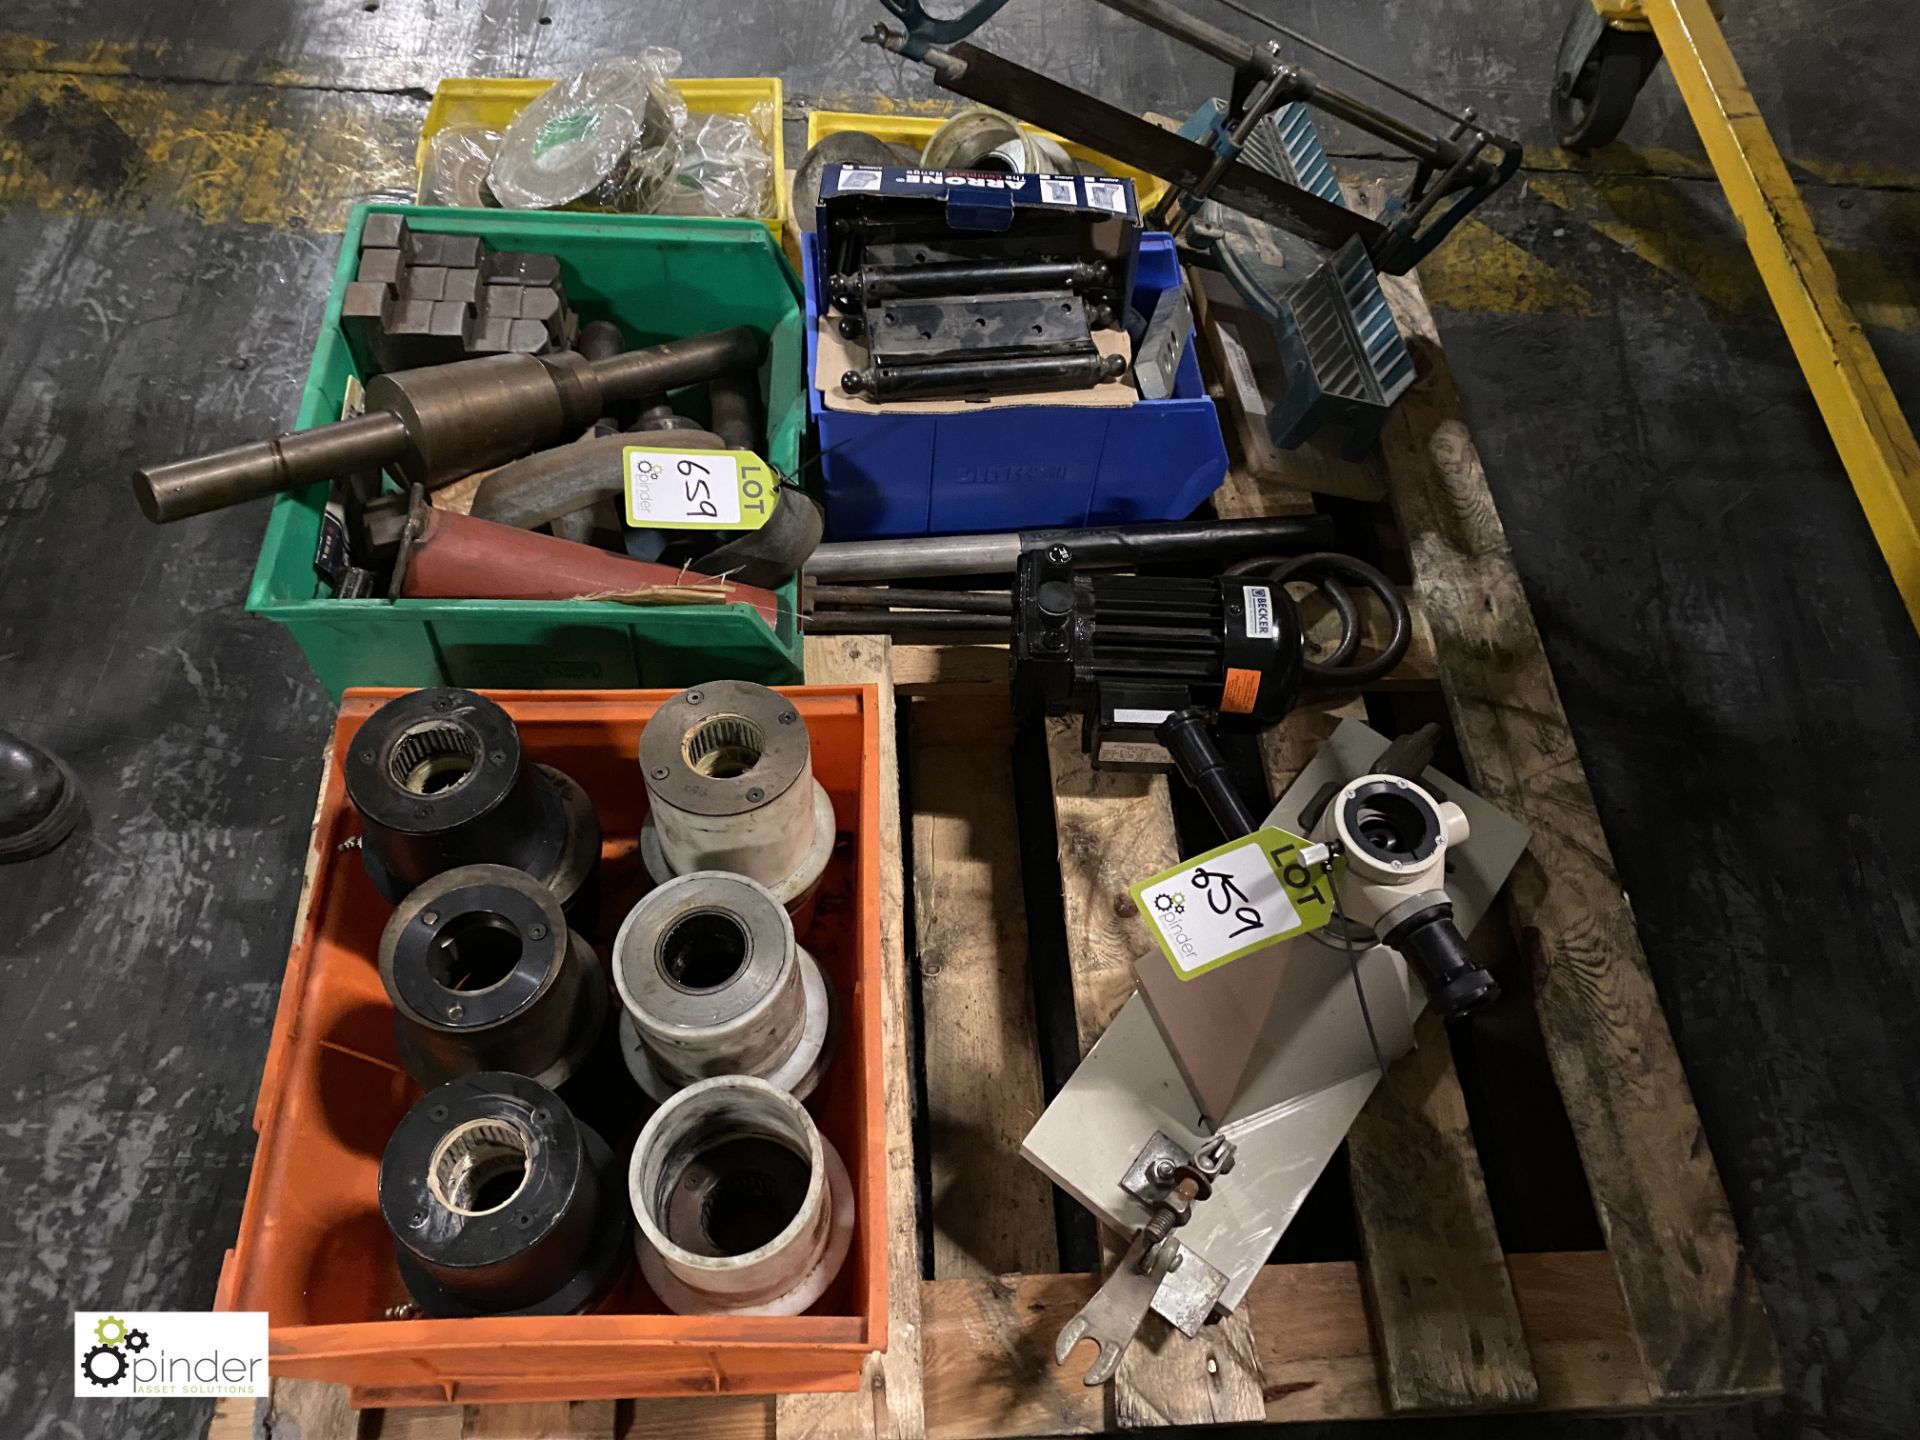 Quantity Couplings, Chuck Jaws, Centres, Mitre Saw